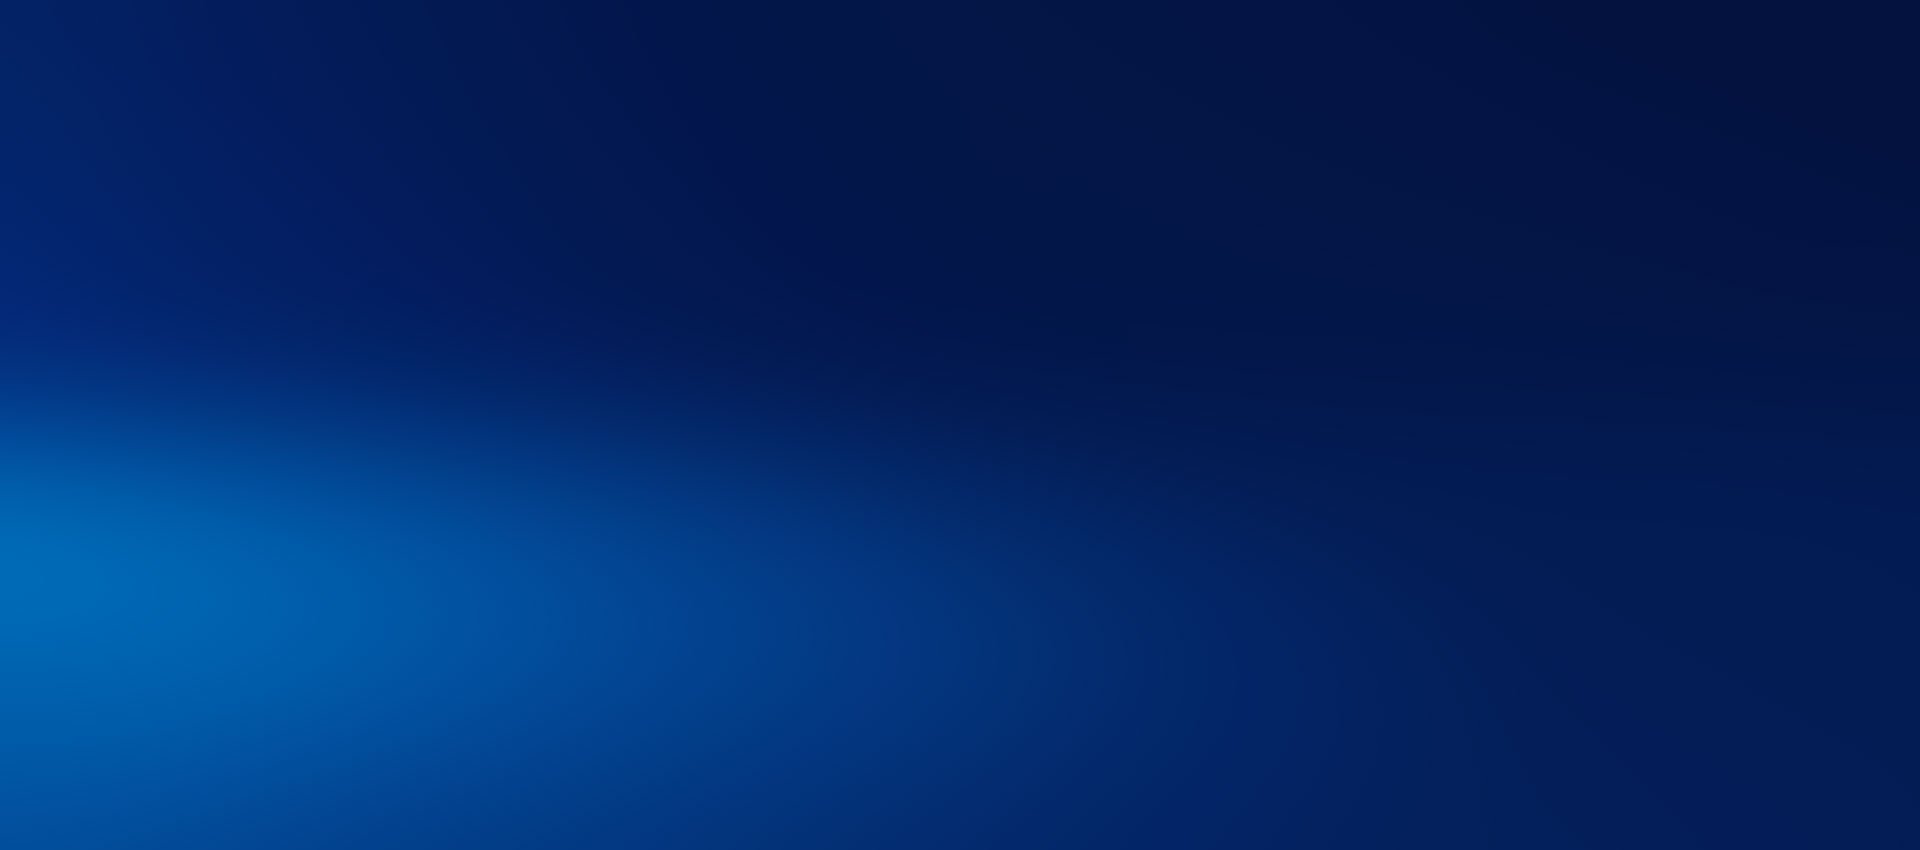 Image: Abstract blue background